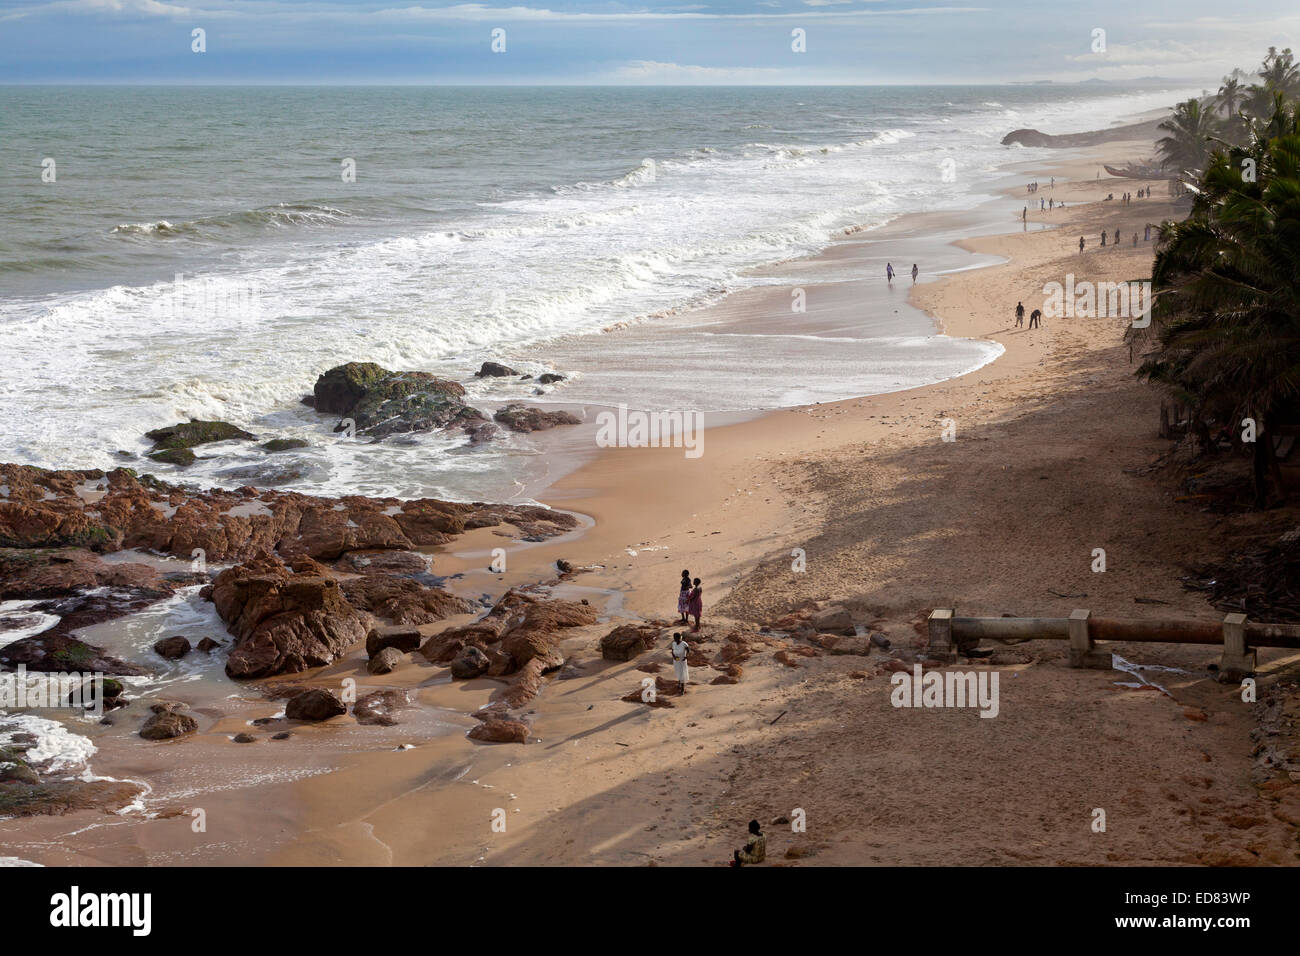 View of beach from Cape Coast Castle, Ghana, Africa Stock Photo